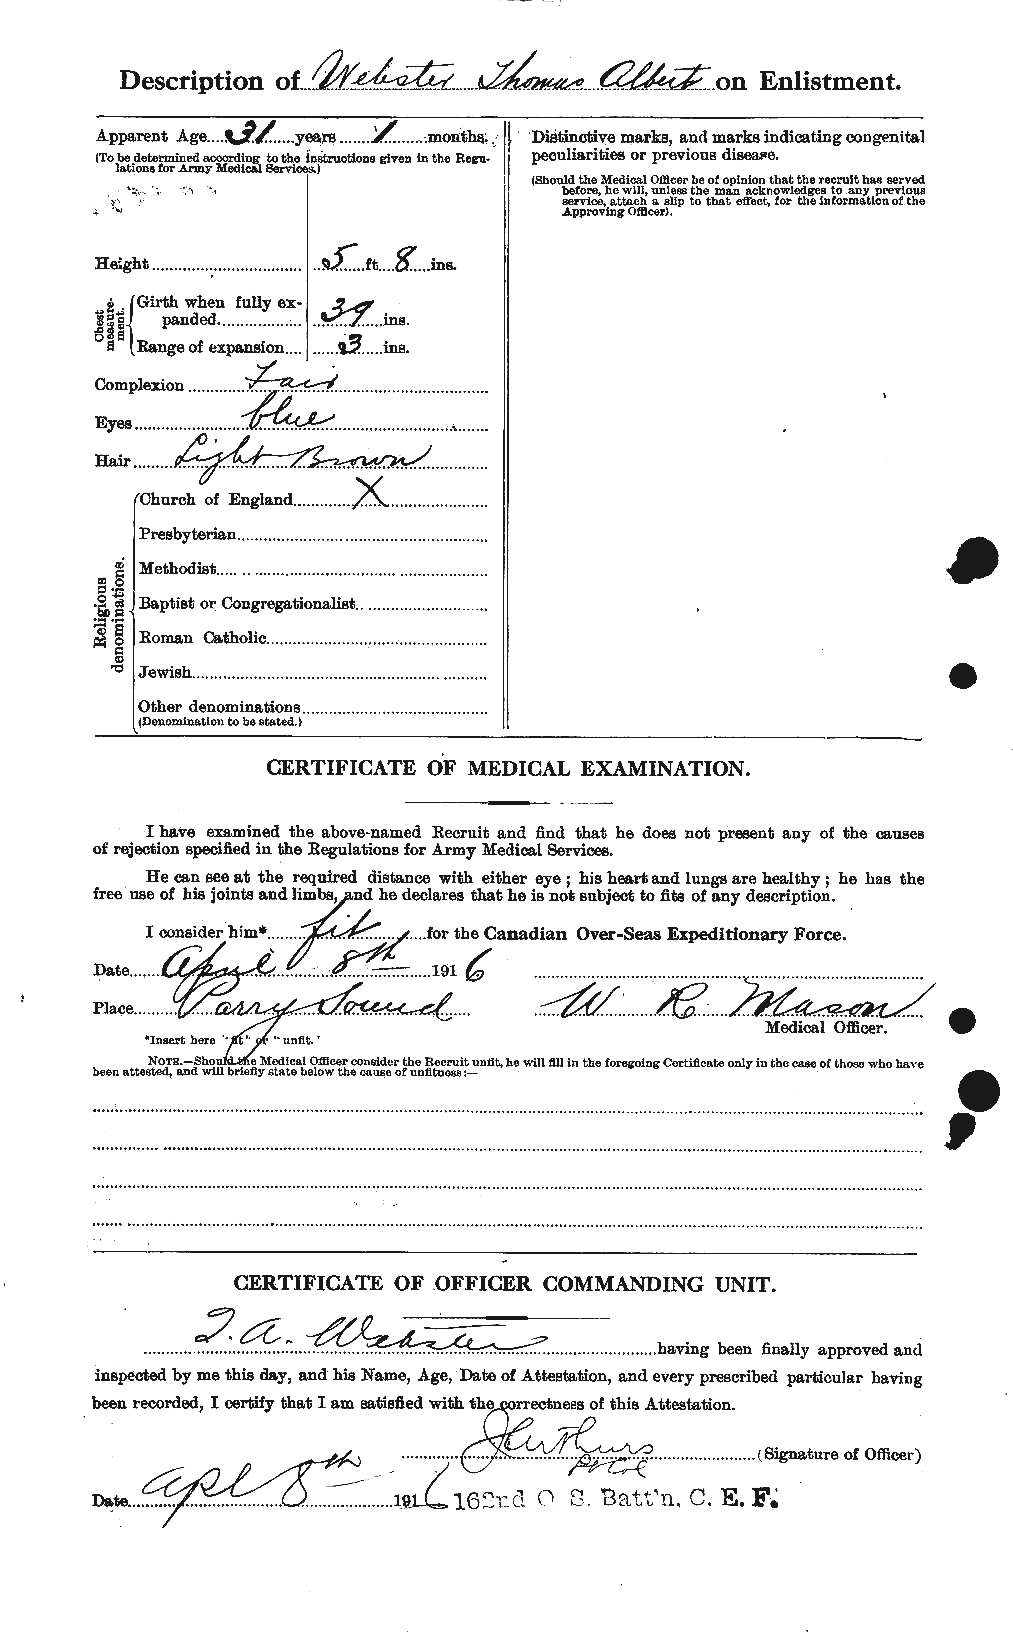 Personnel Records of the First World War - CEF 661989b